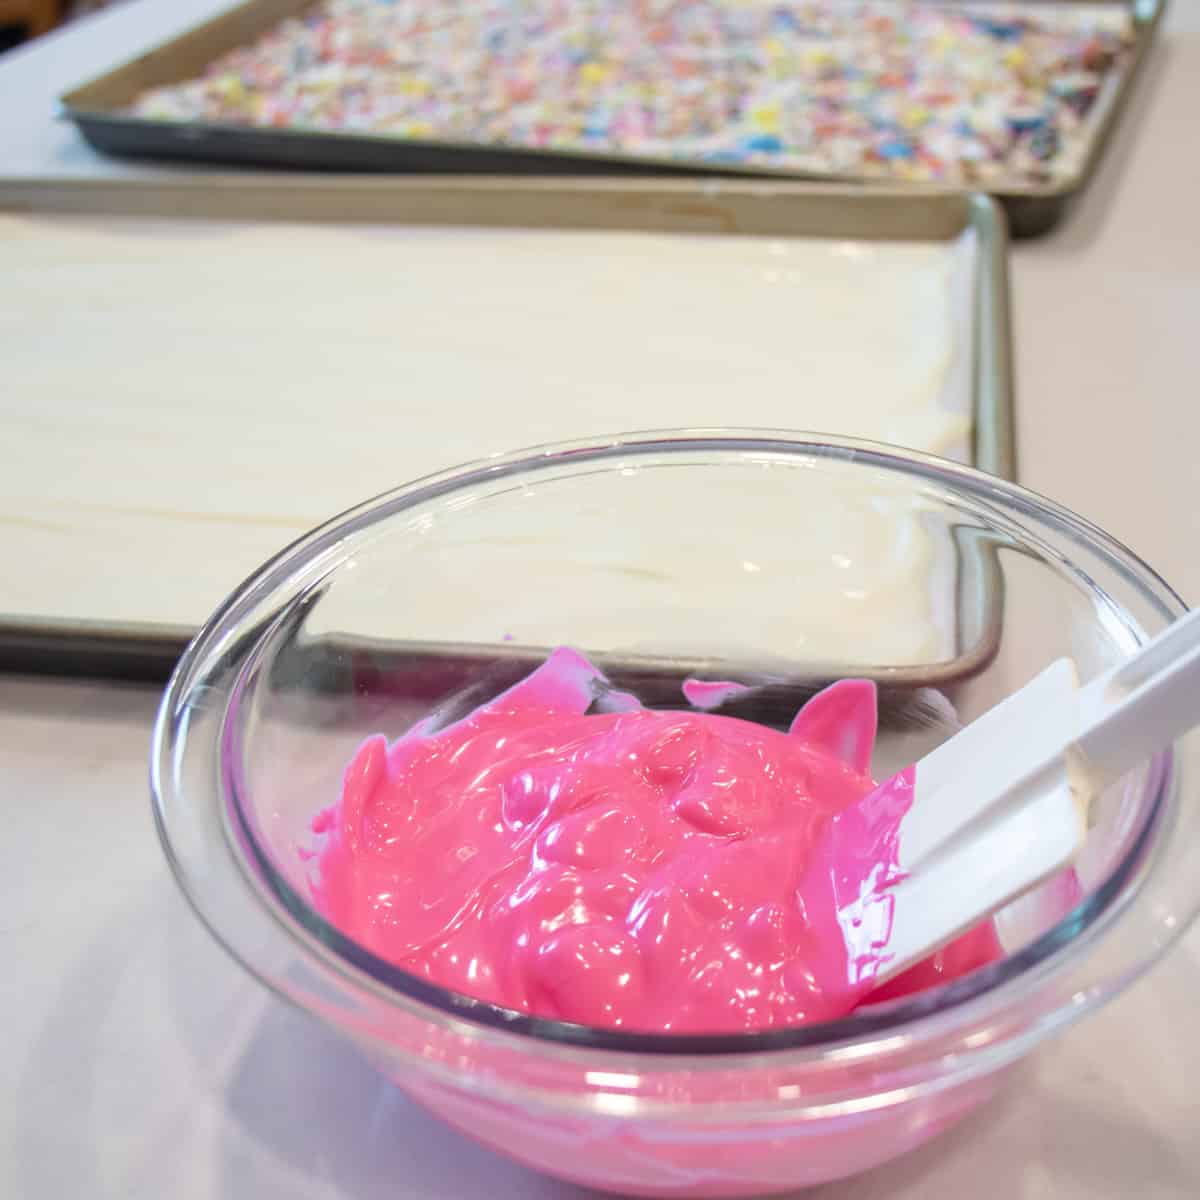 Pink candy melts in a glass bowl.